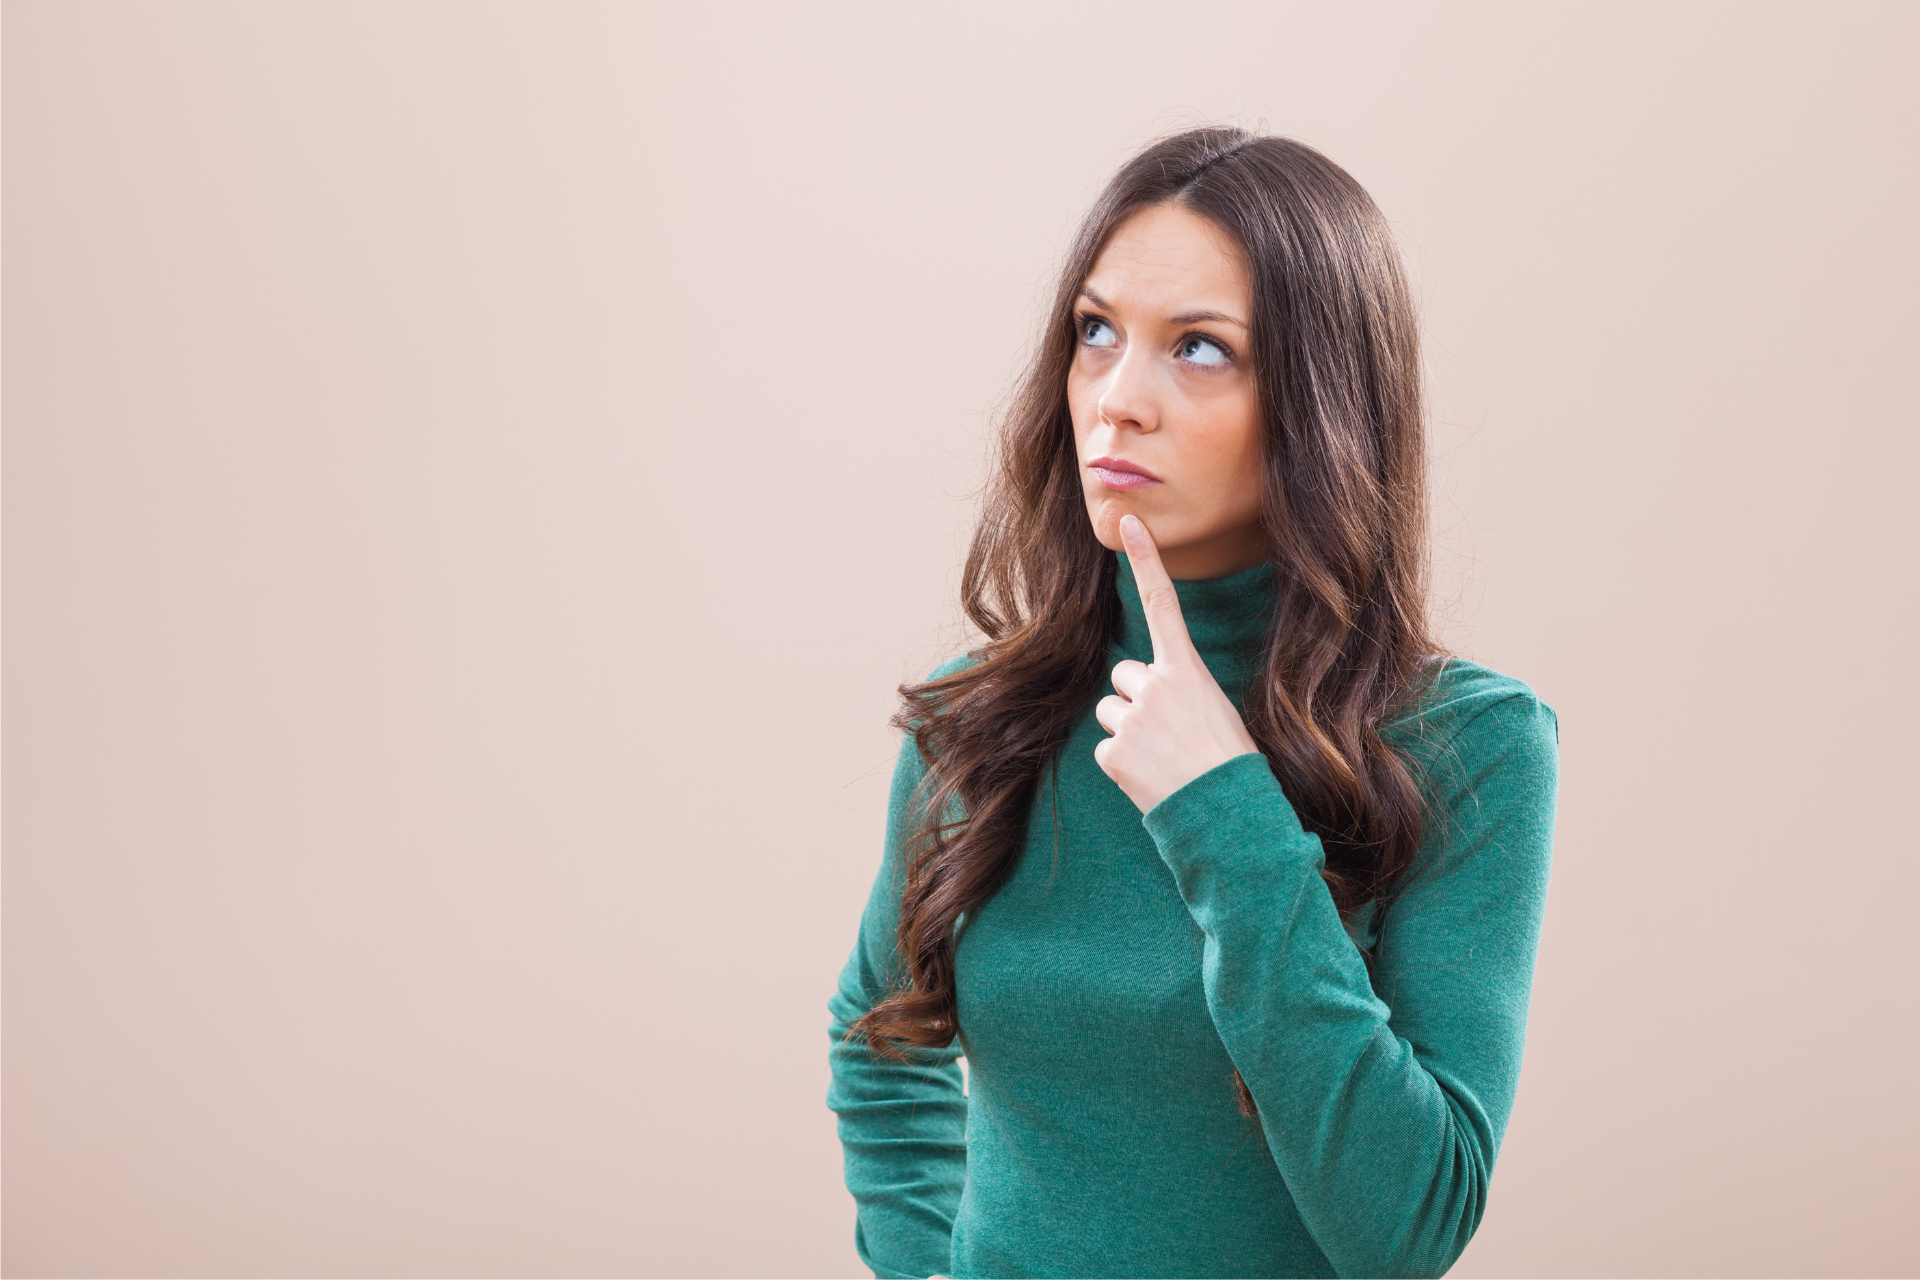 A woman in a green sweater is holding her finger to her chin and looking up.